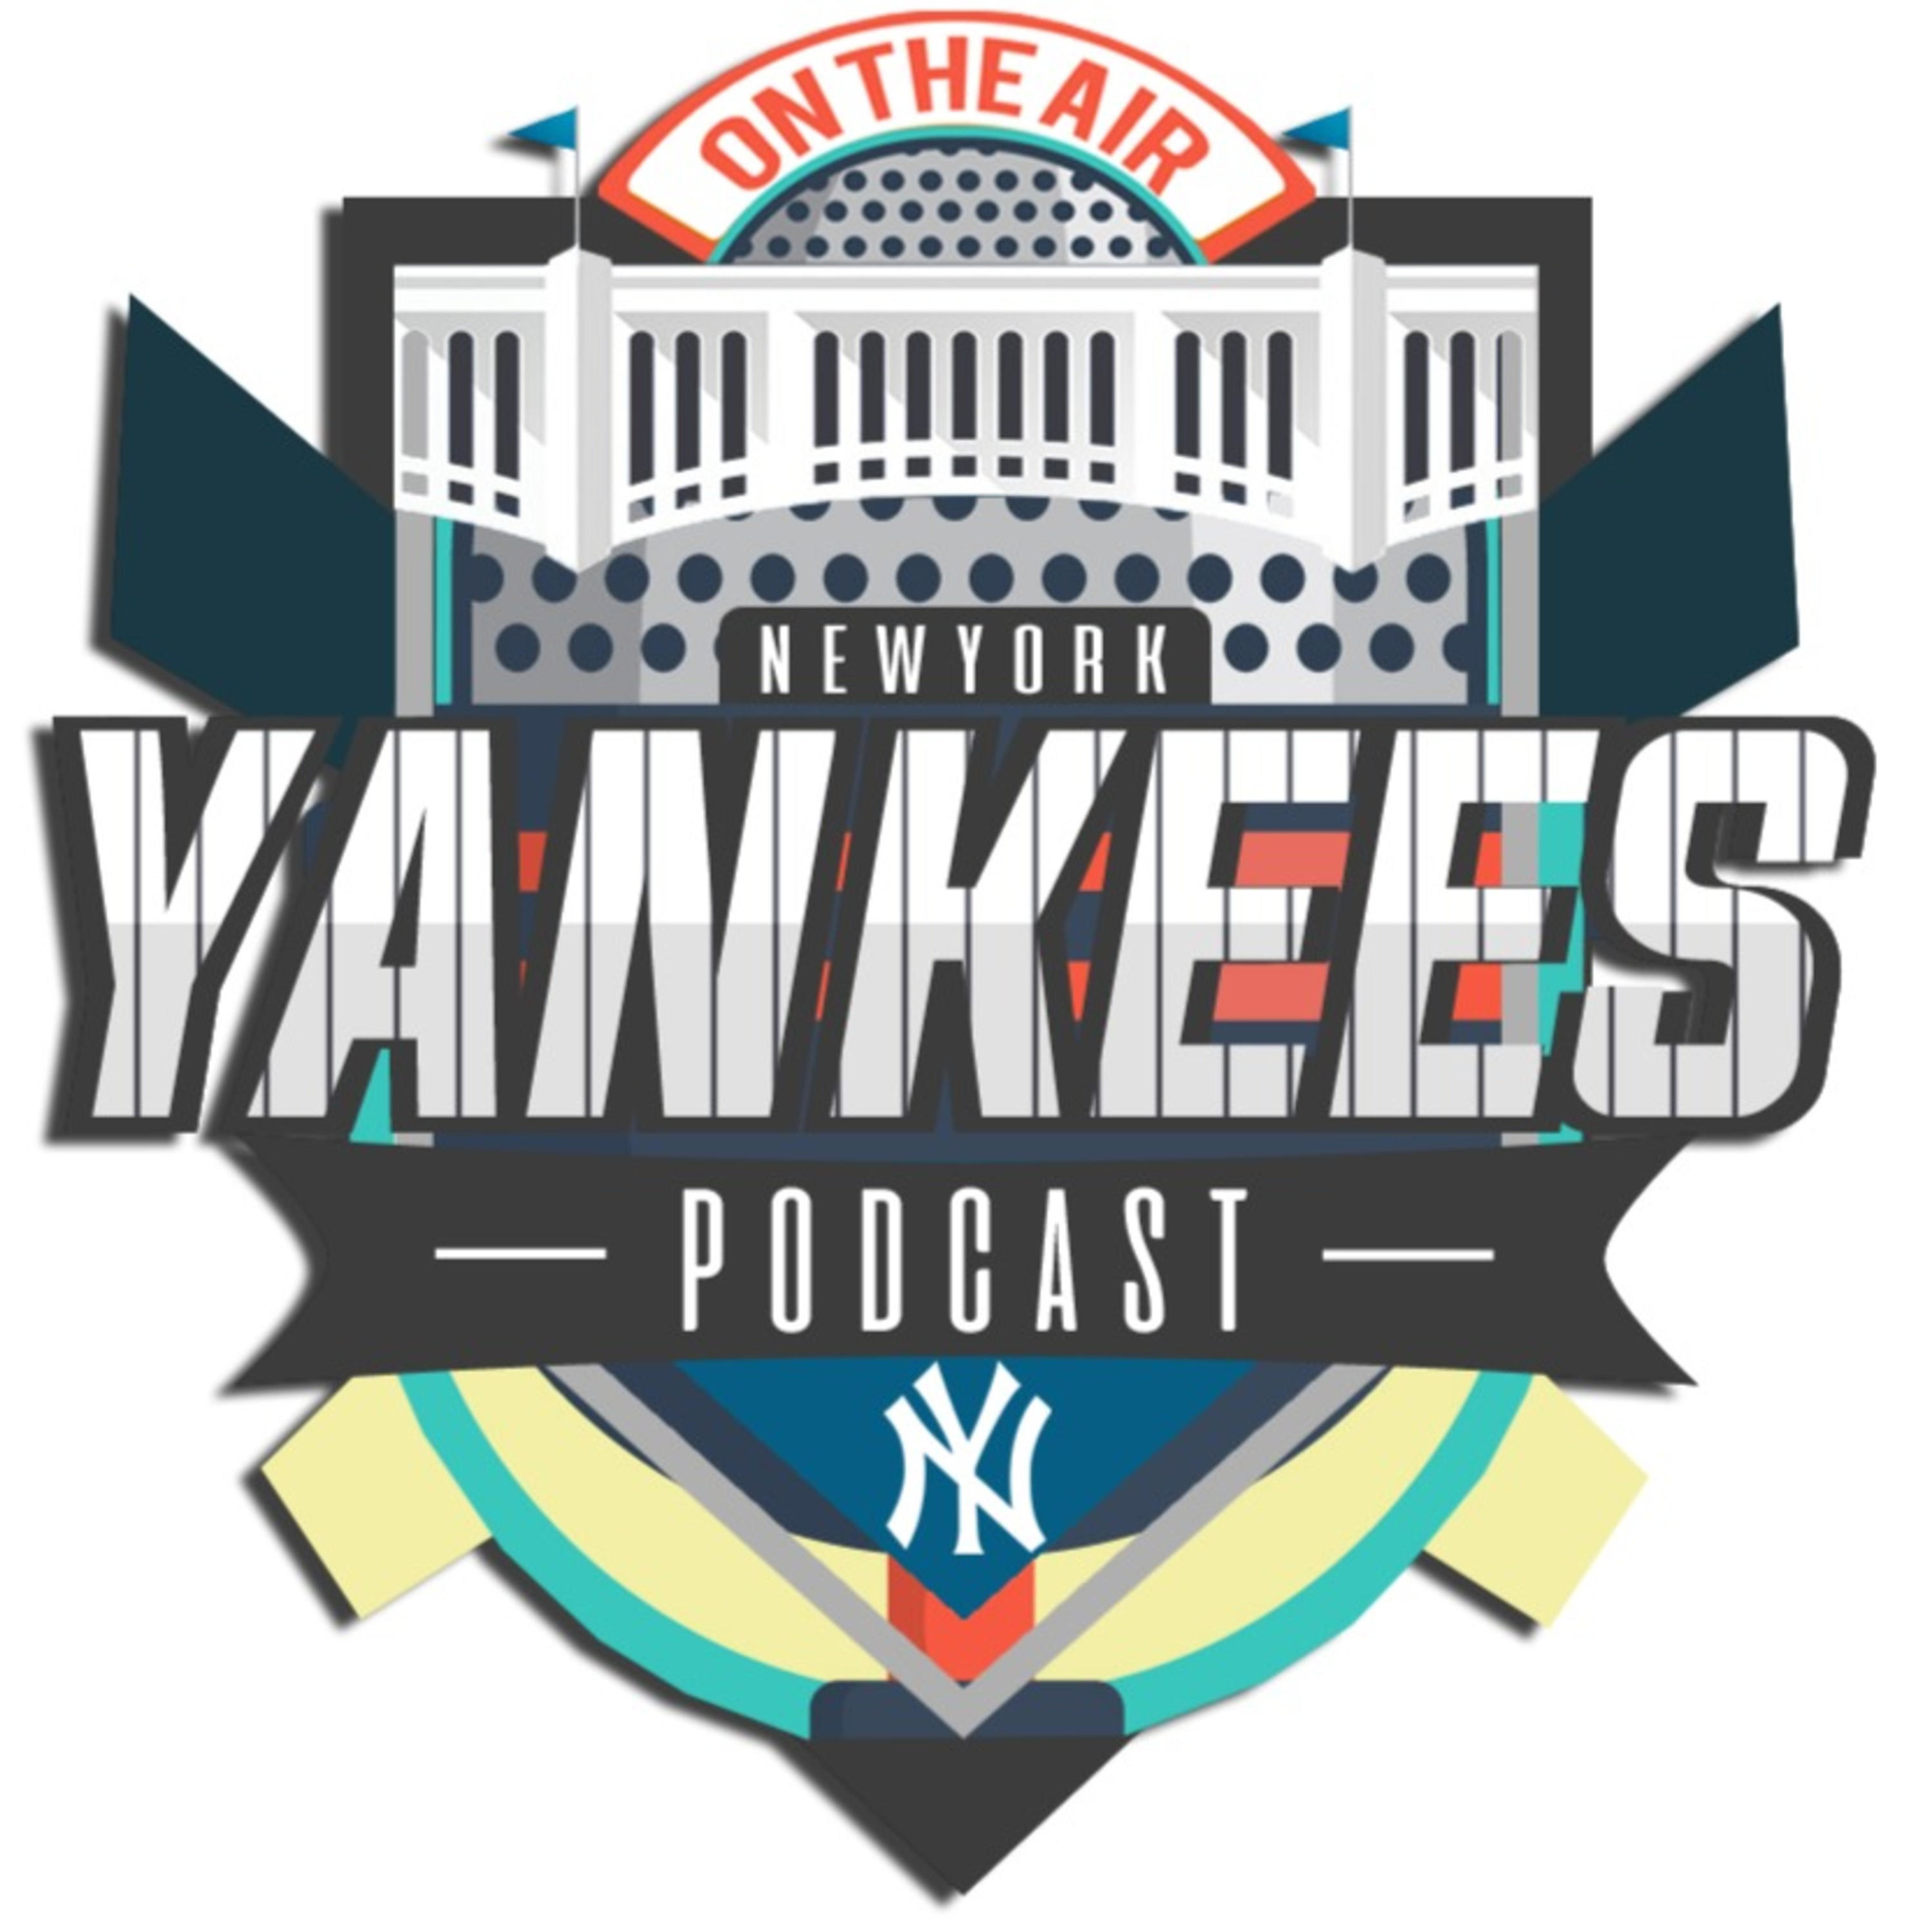 New York Yankees Hungary Podcast - Bé x DS! x Mike - S06EP11